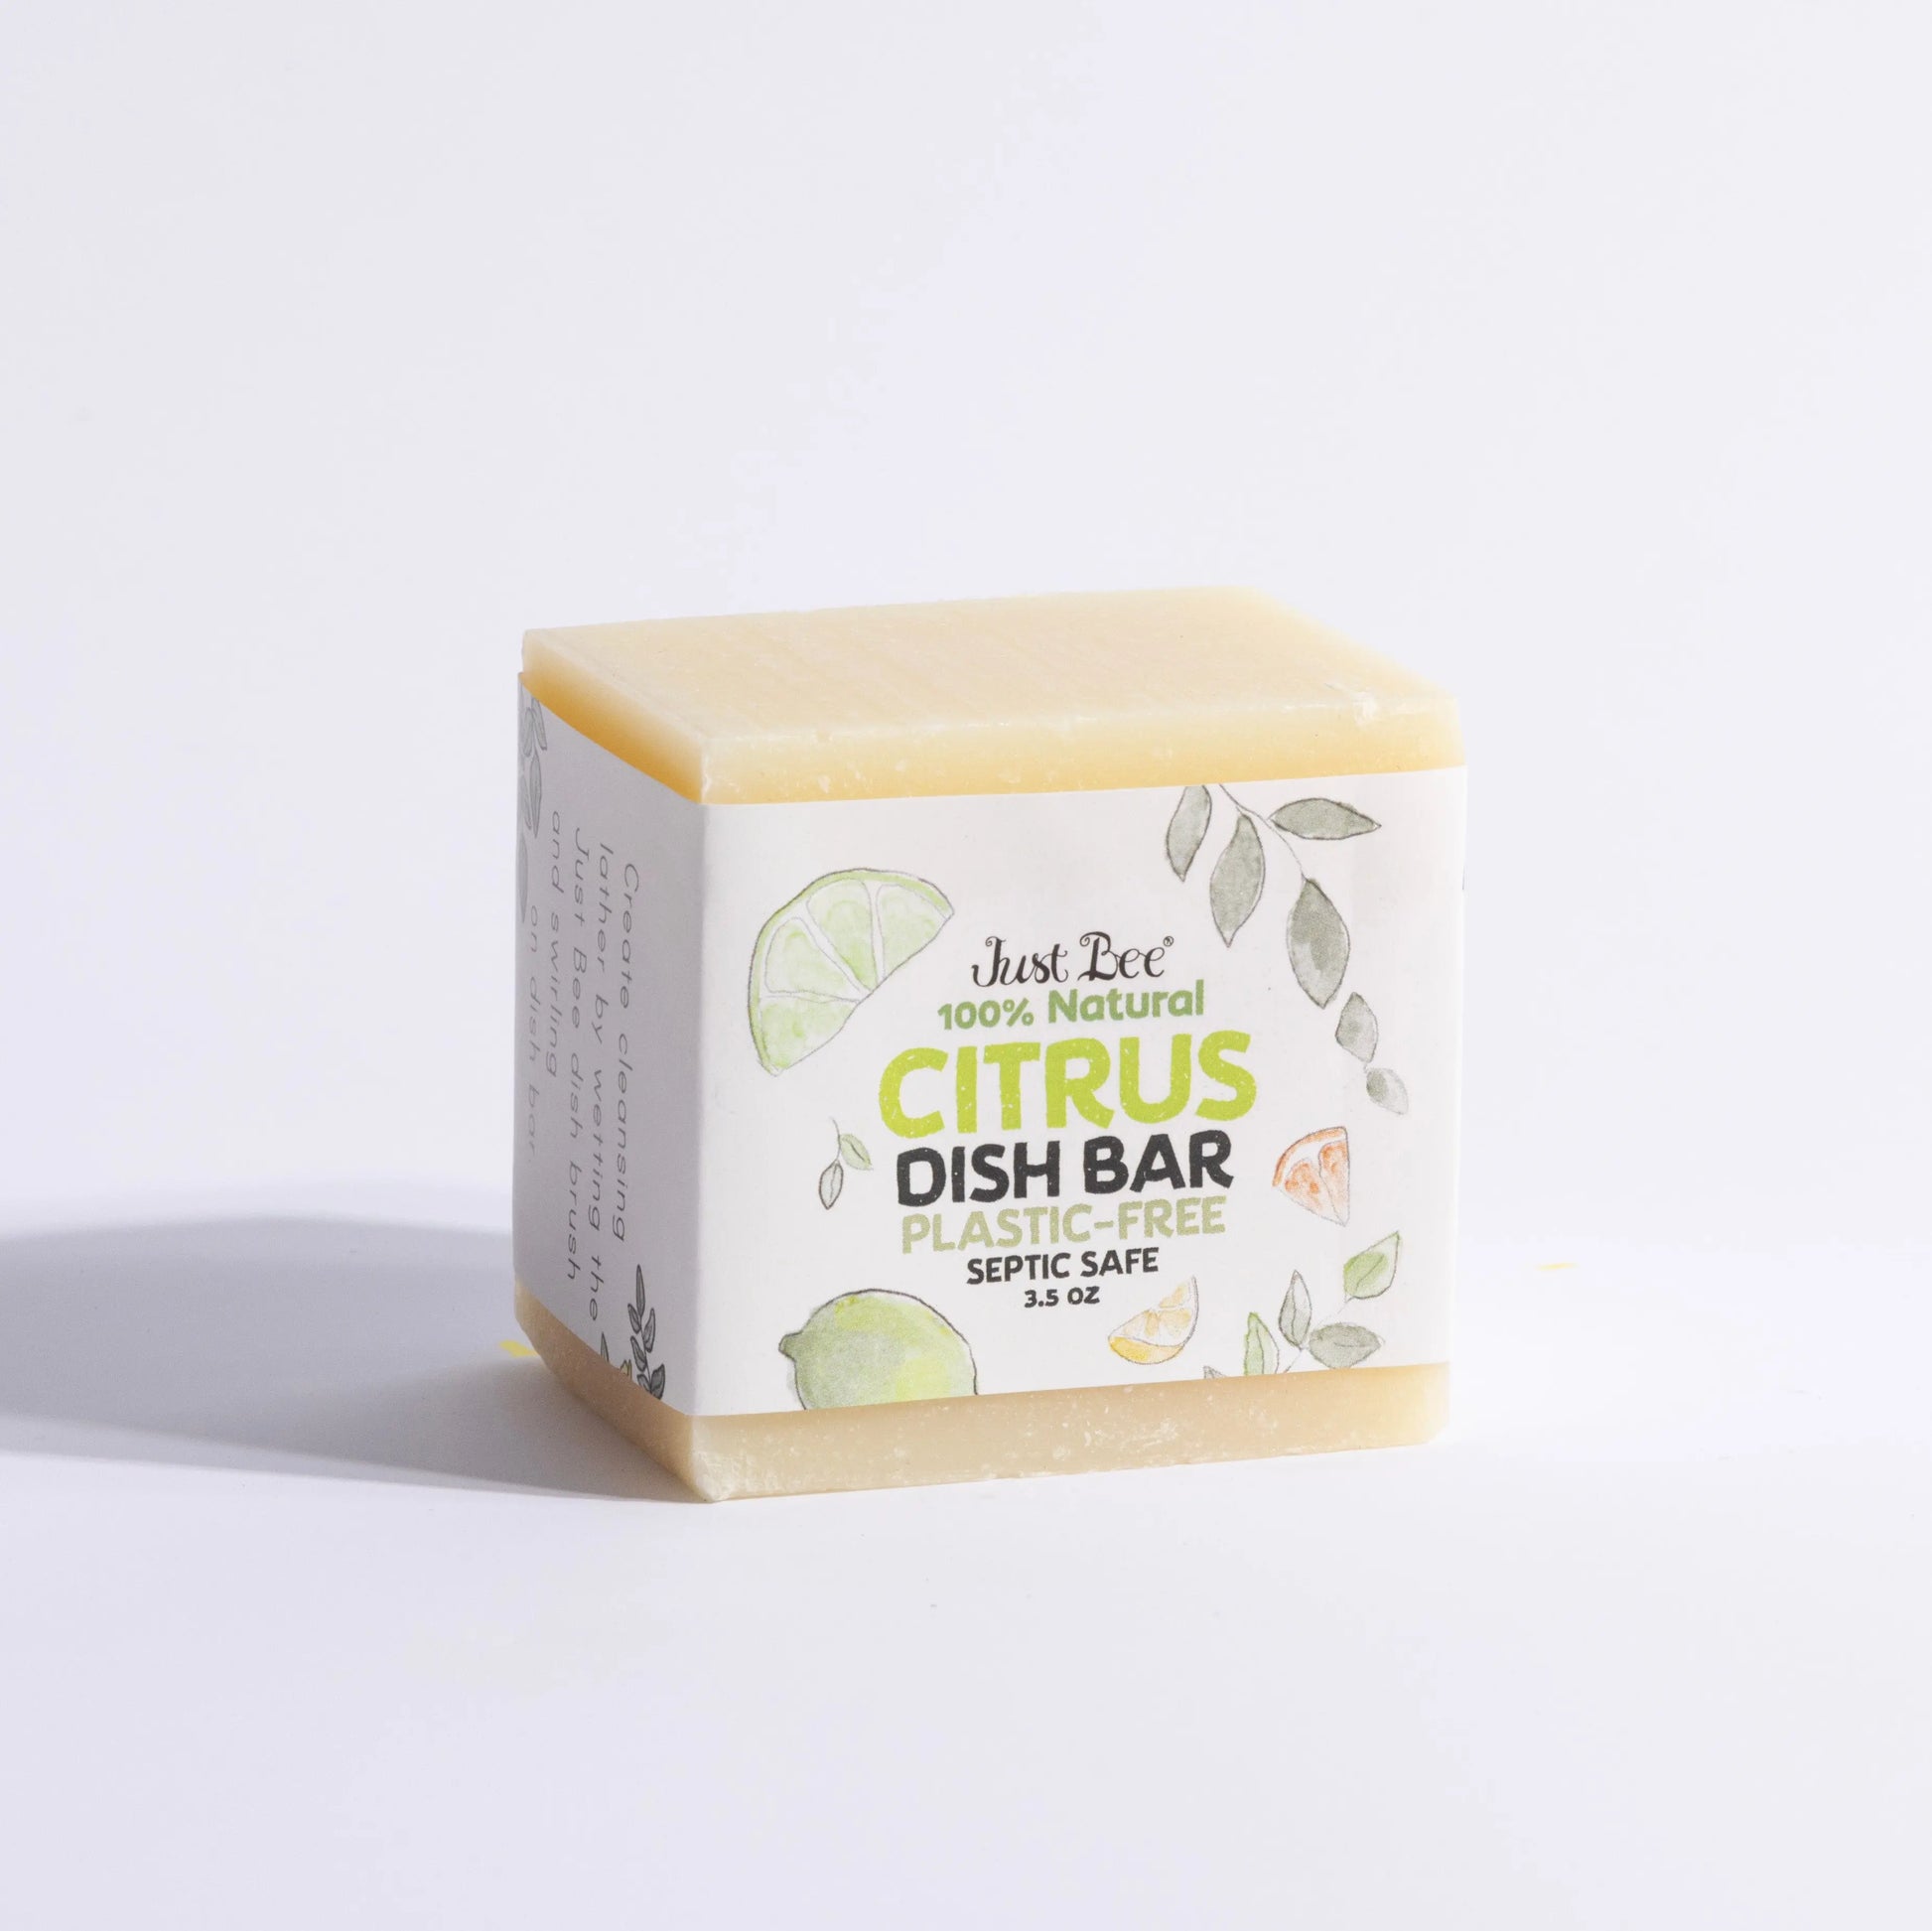 Citrus Dish Bar - Plastic Free by Just Bee Just Bee Cosmetics